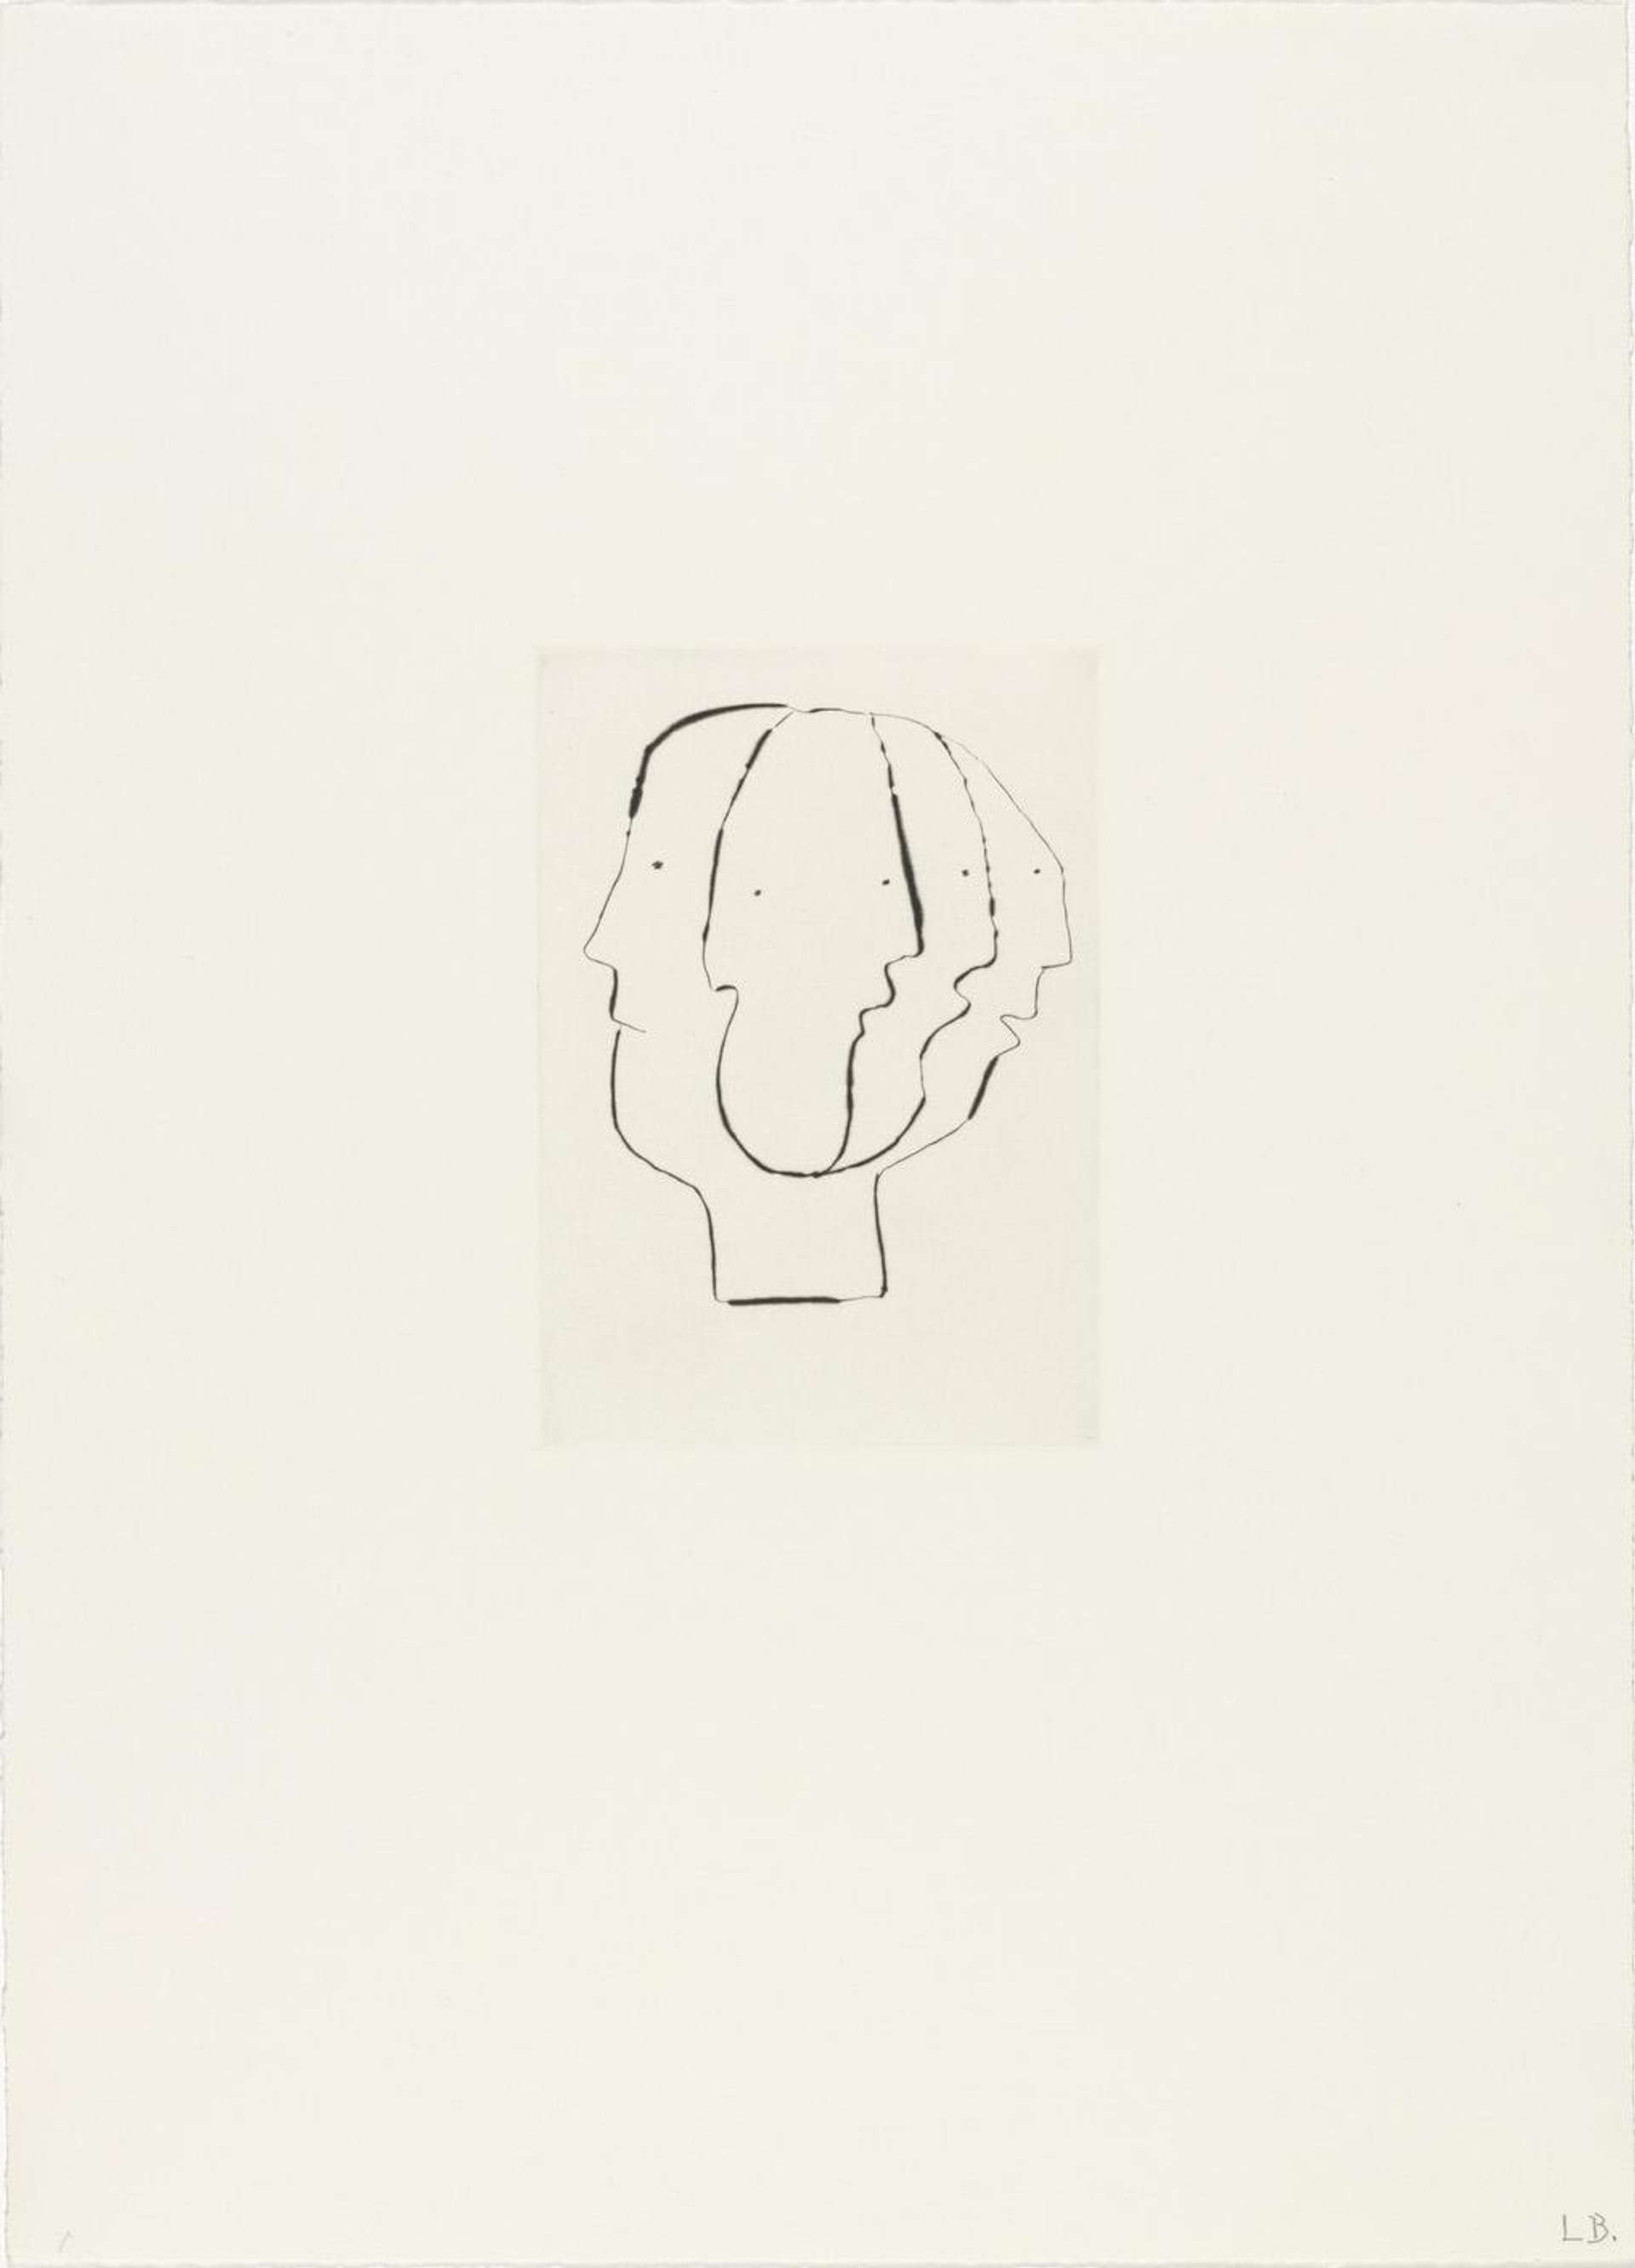 Untitled No. 1 - Signed Print by Louise Bourgeois 1990 - MyArtBroker